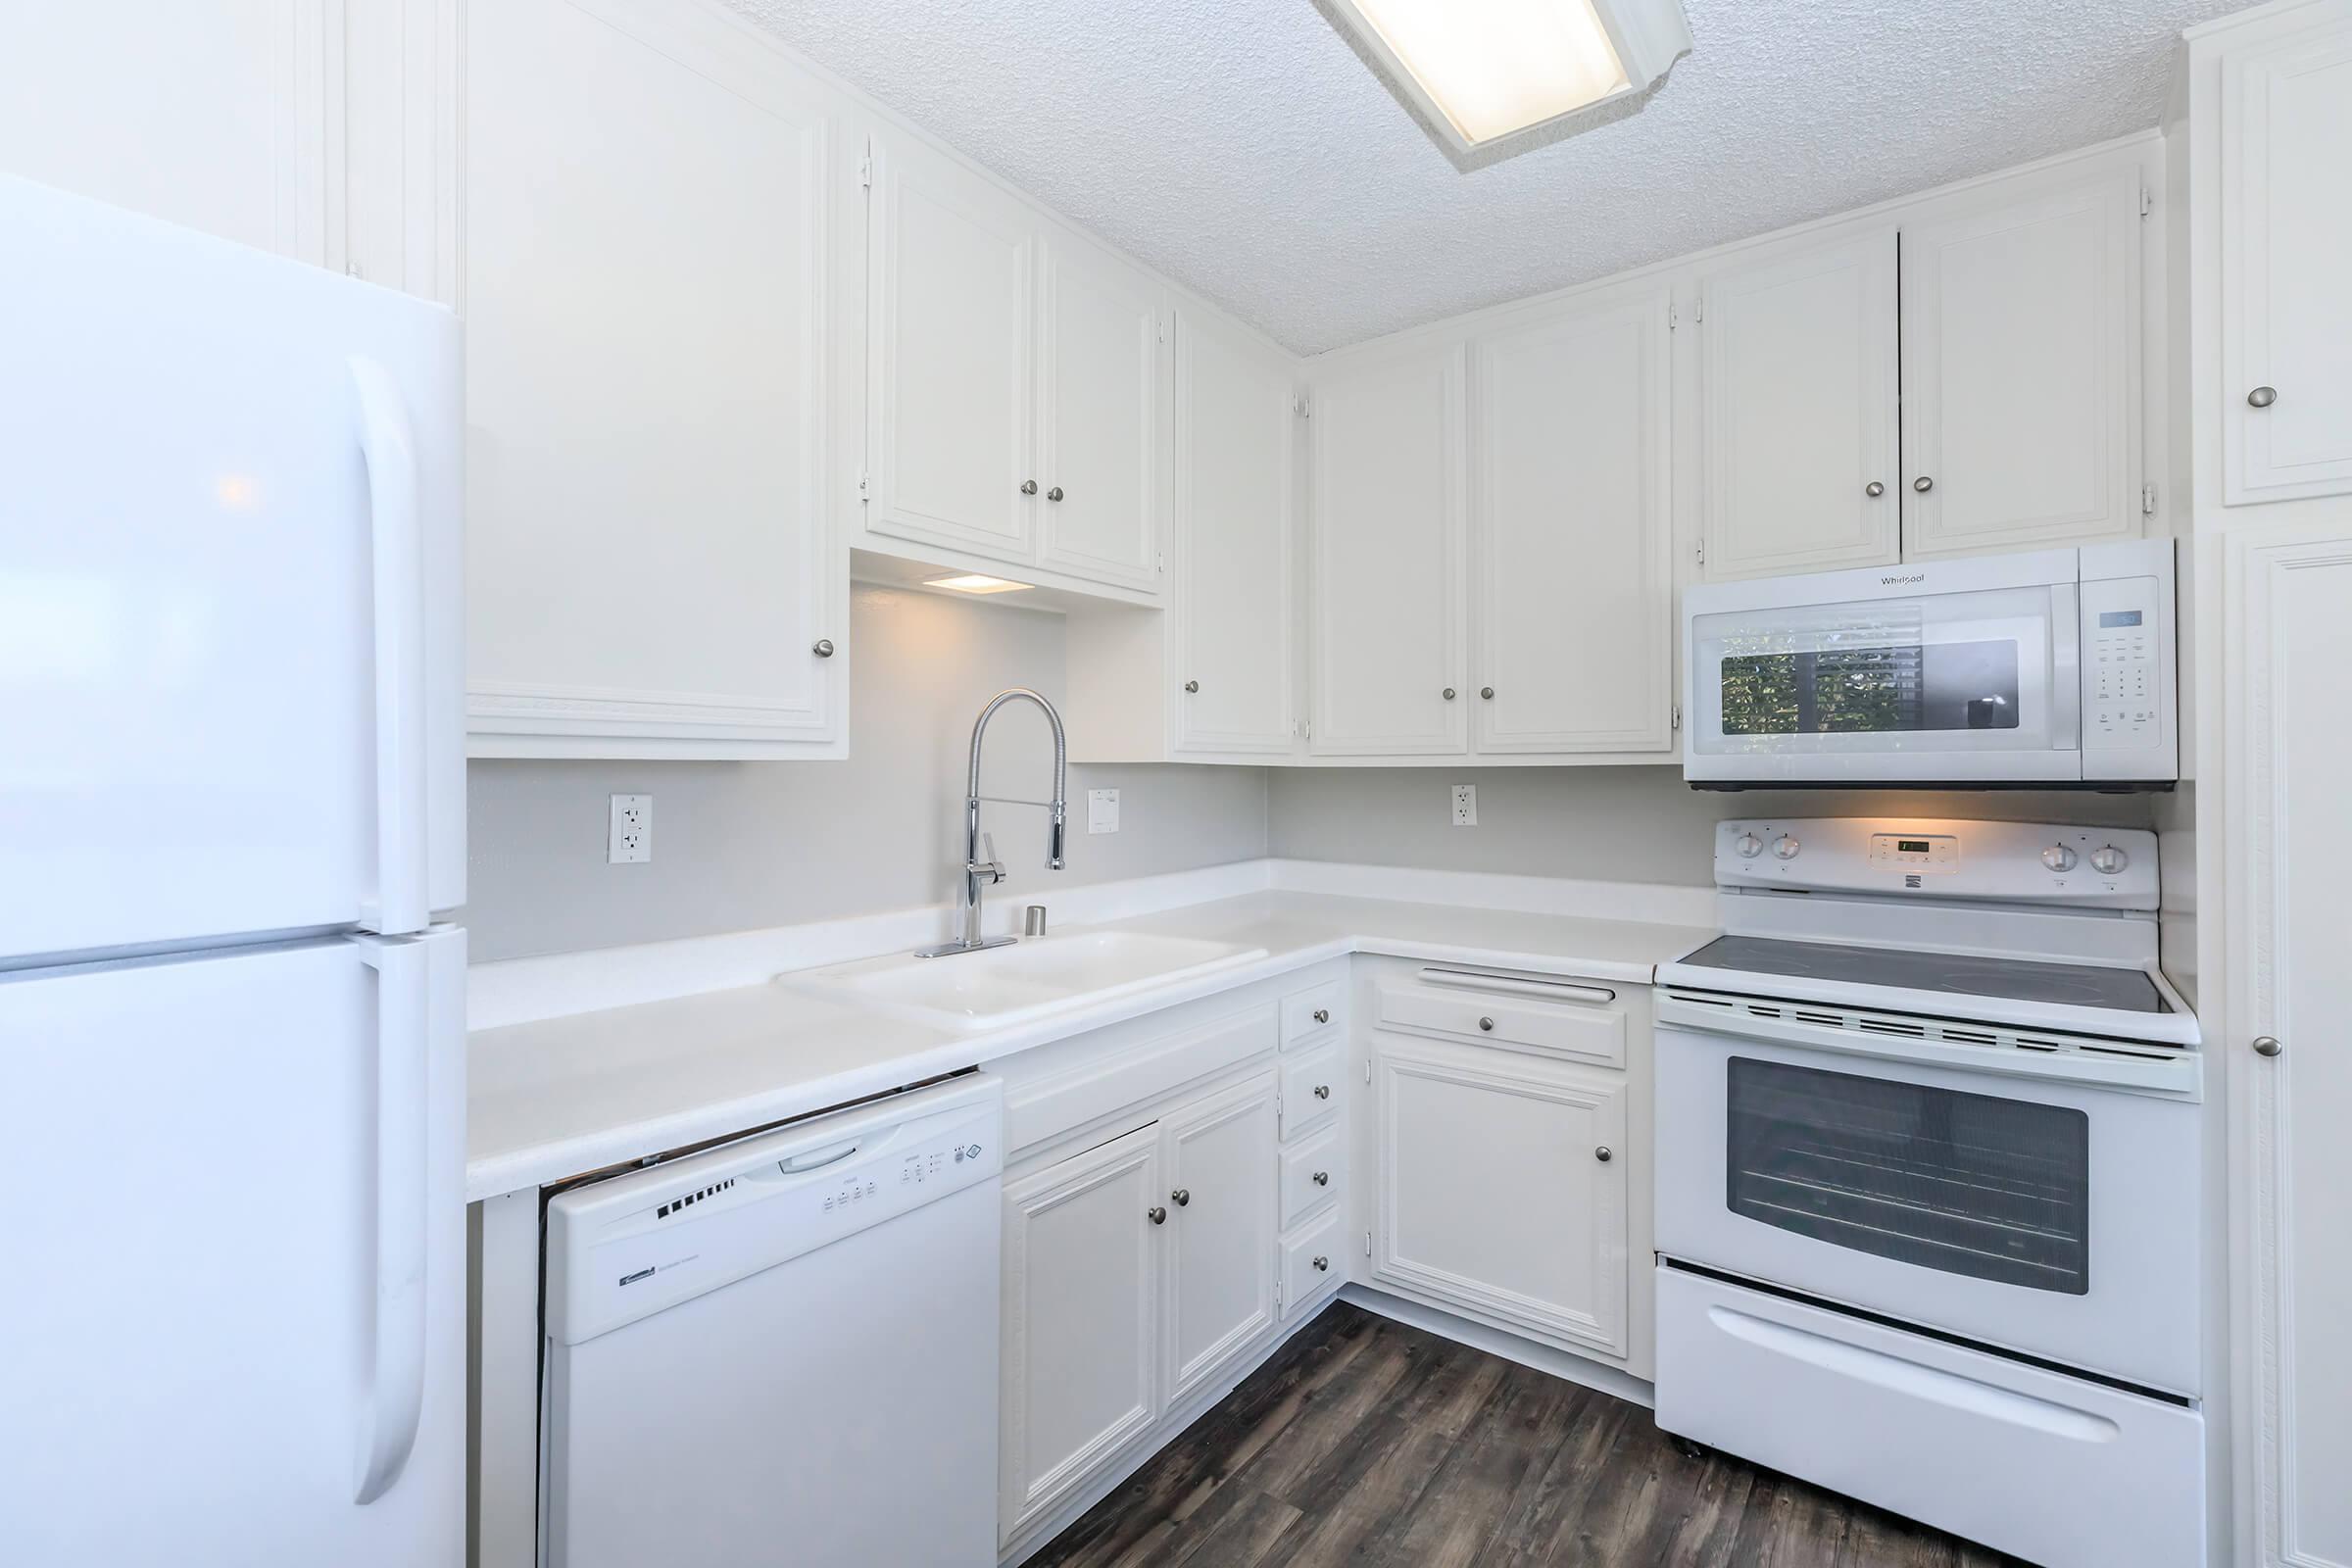 Two Bedroom Apartments in San Diego CA - Casa Del Norte Apartments - Elegant Kitchen with White Cabinetry and Countertops and All White Appliances